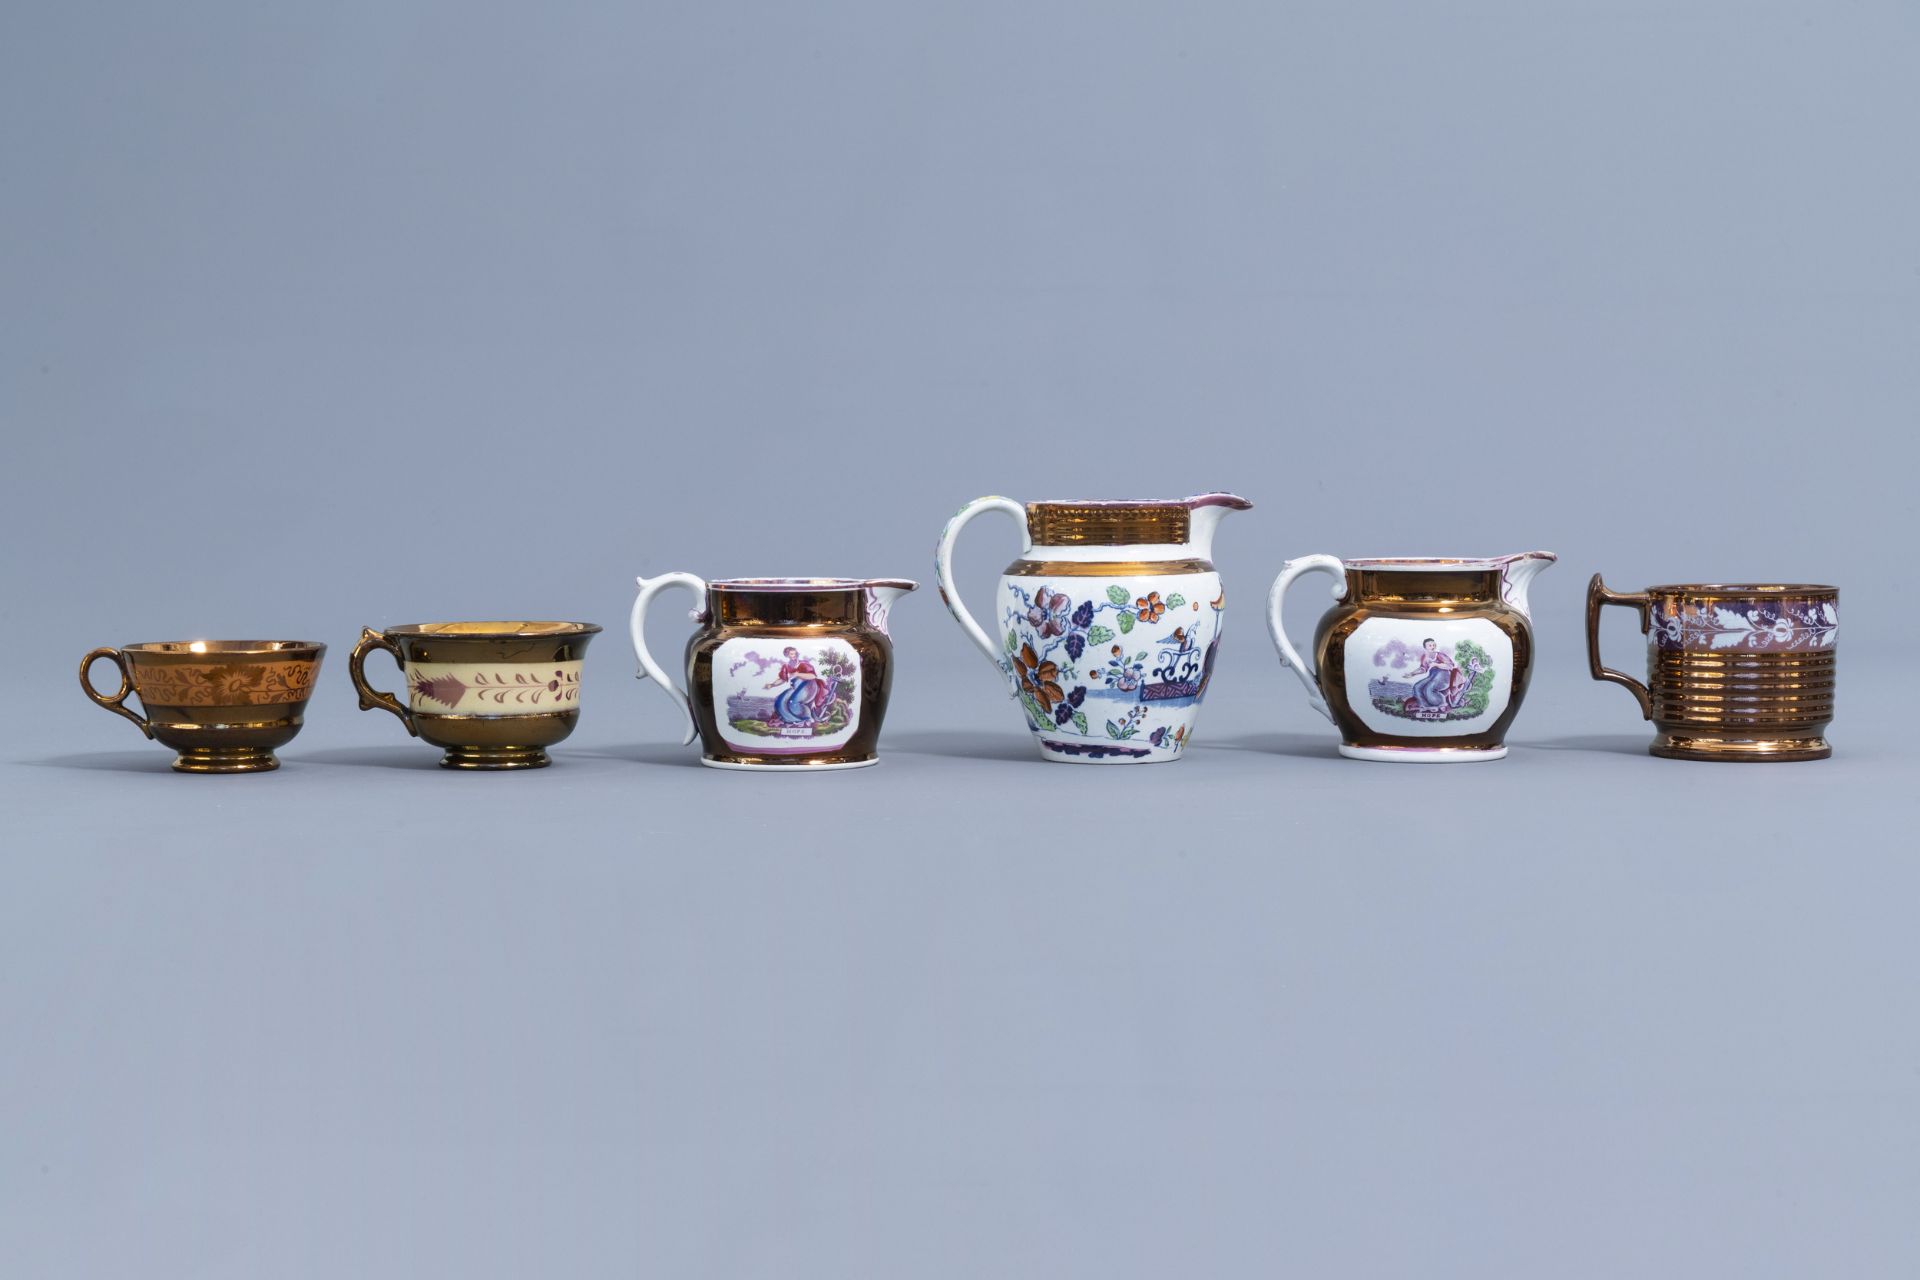 A varied collection of English lustreware items, 19th C. - Image 15 of 44